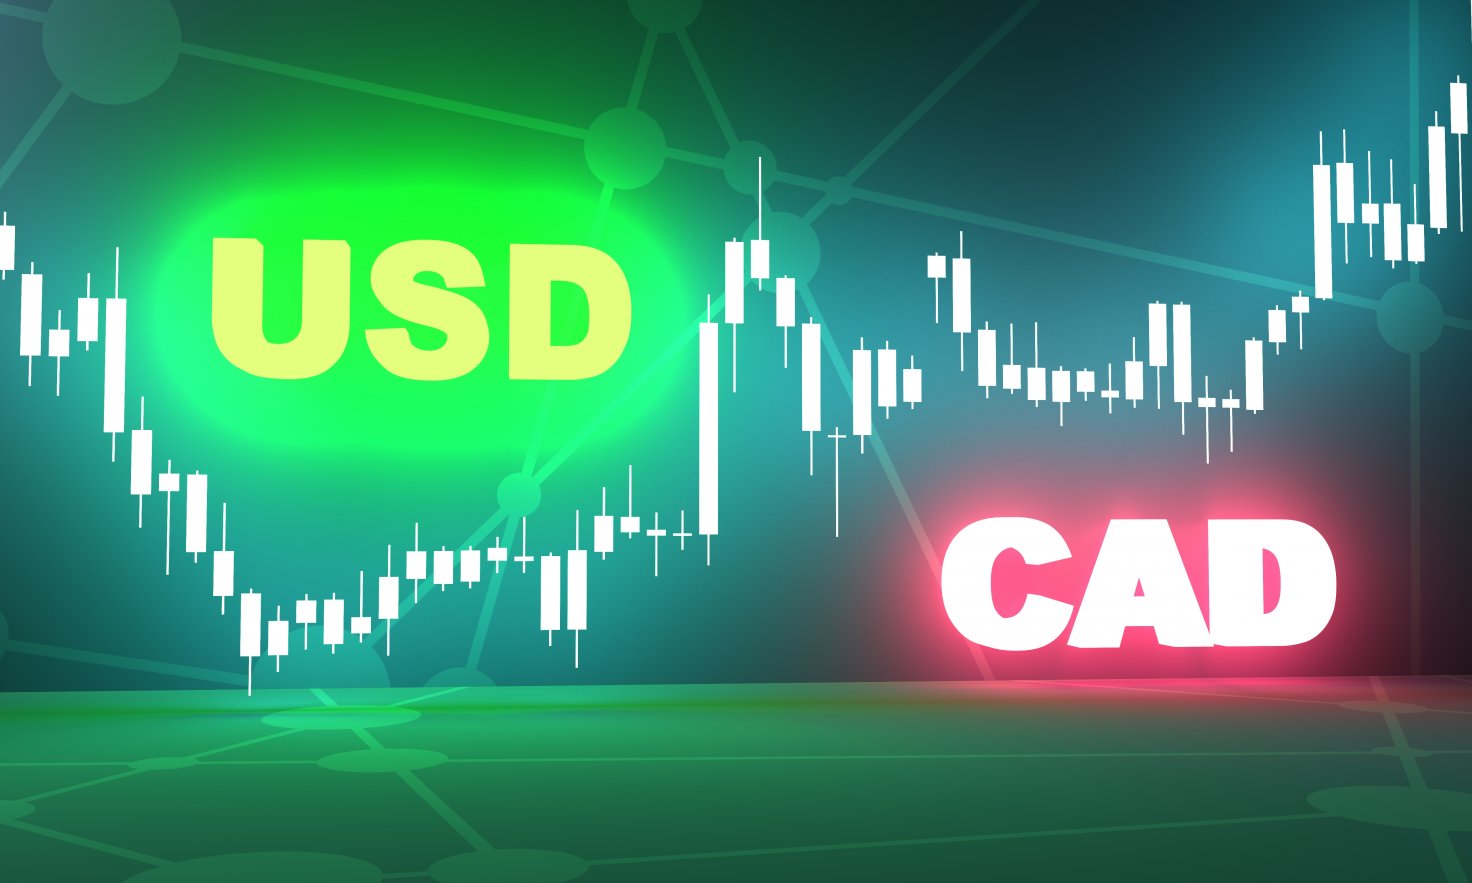 USD/CAD to trade below 1.30 on a Fed shift to average inflation targeting – Westpac